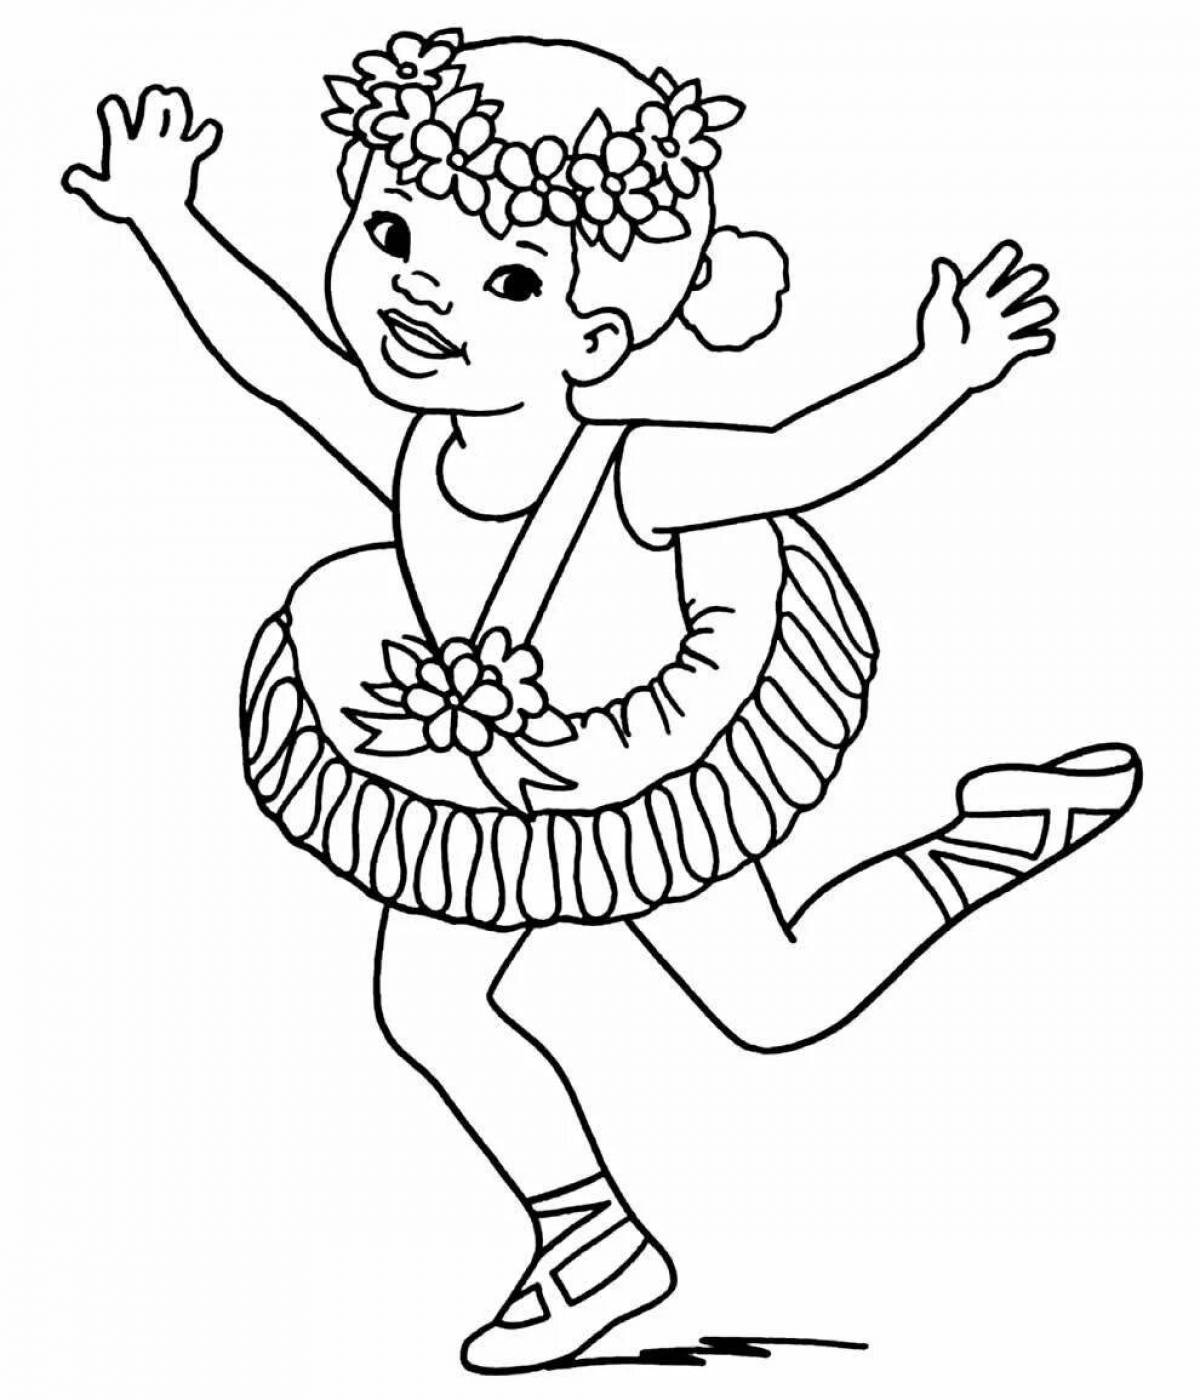 Dynamic dance coloring page